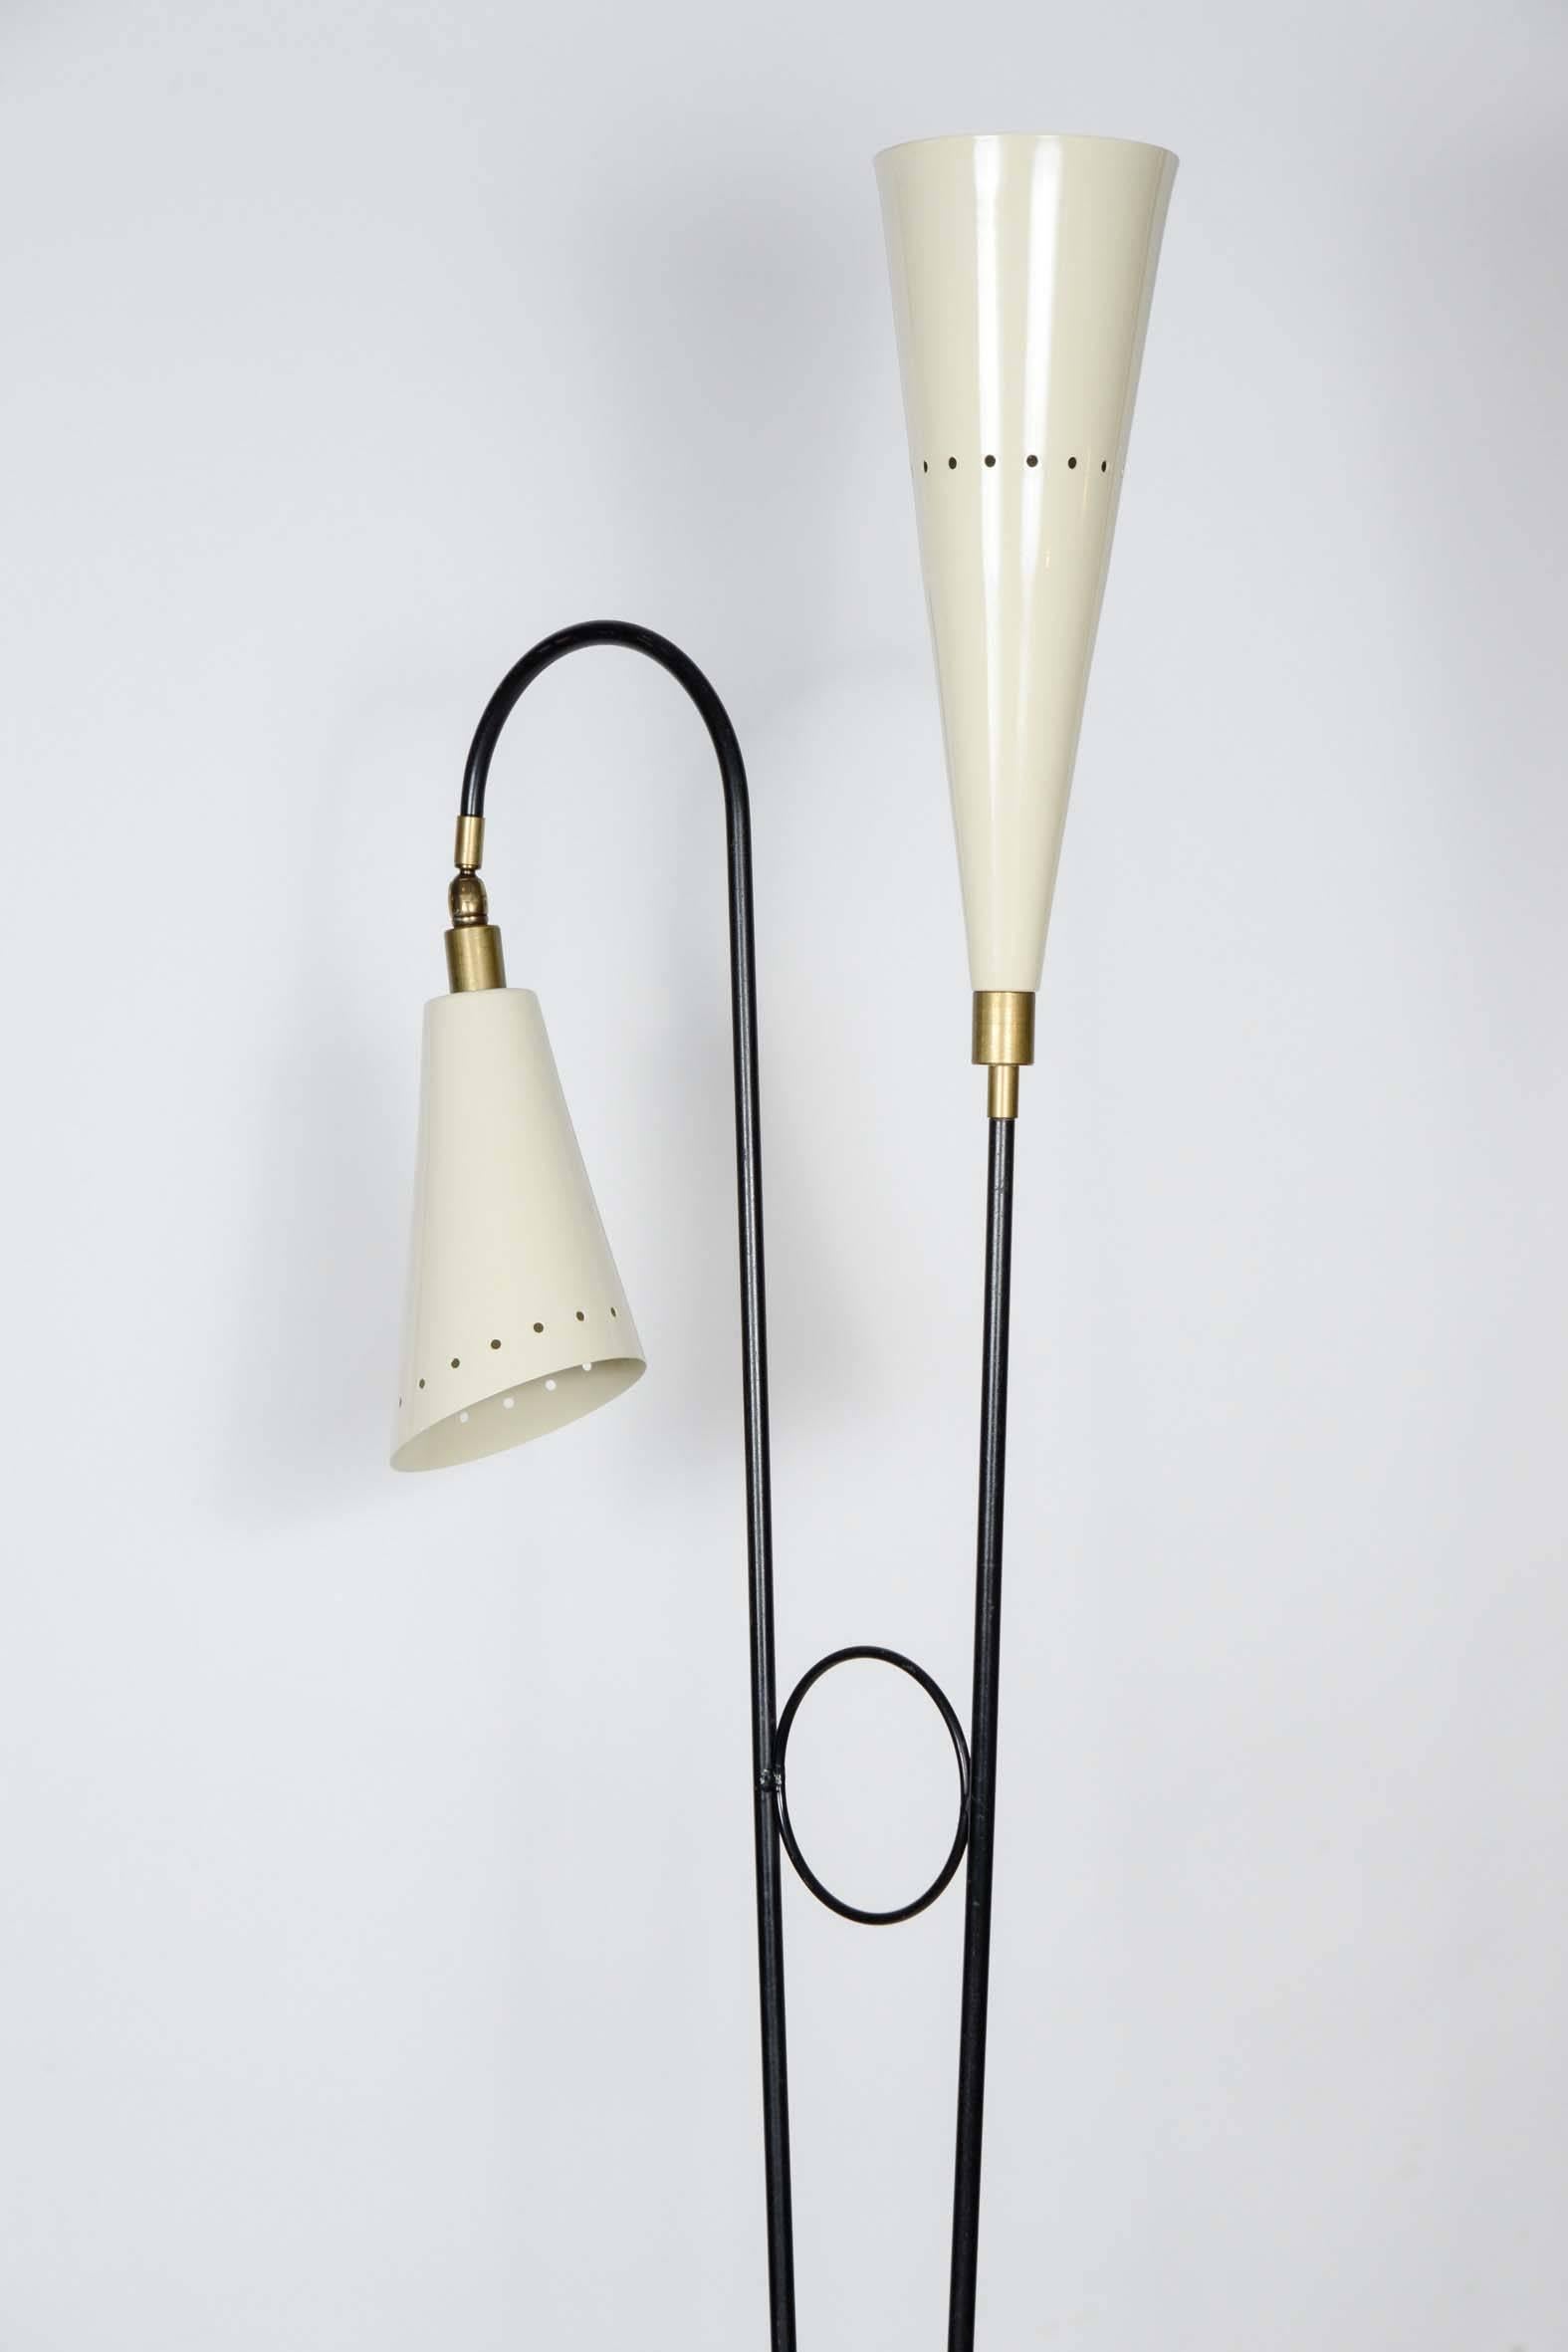 Mid-Century Modern Rare Two Arms Floor Lamp attributed to Stilnovo, circa 1960s